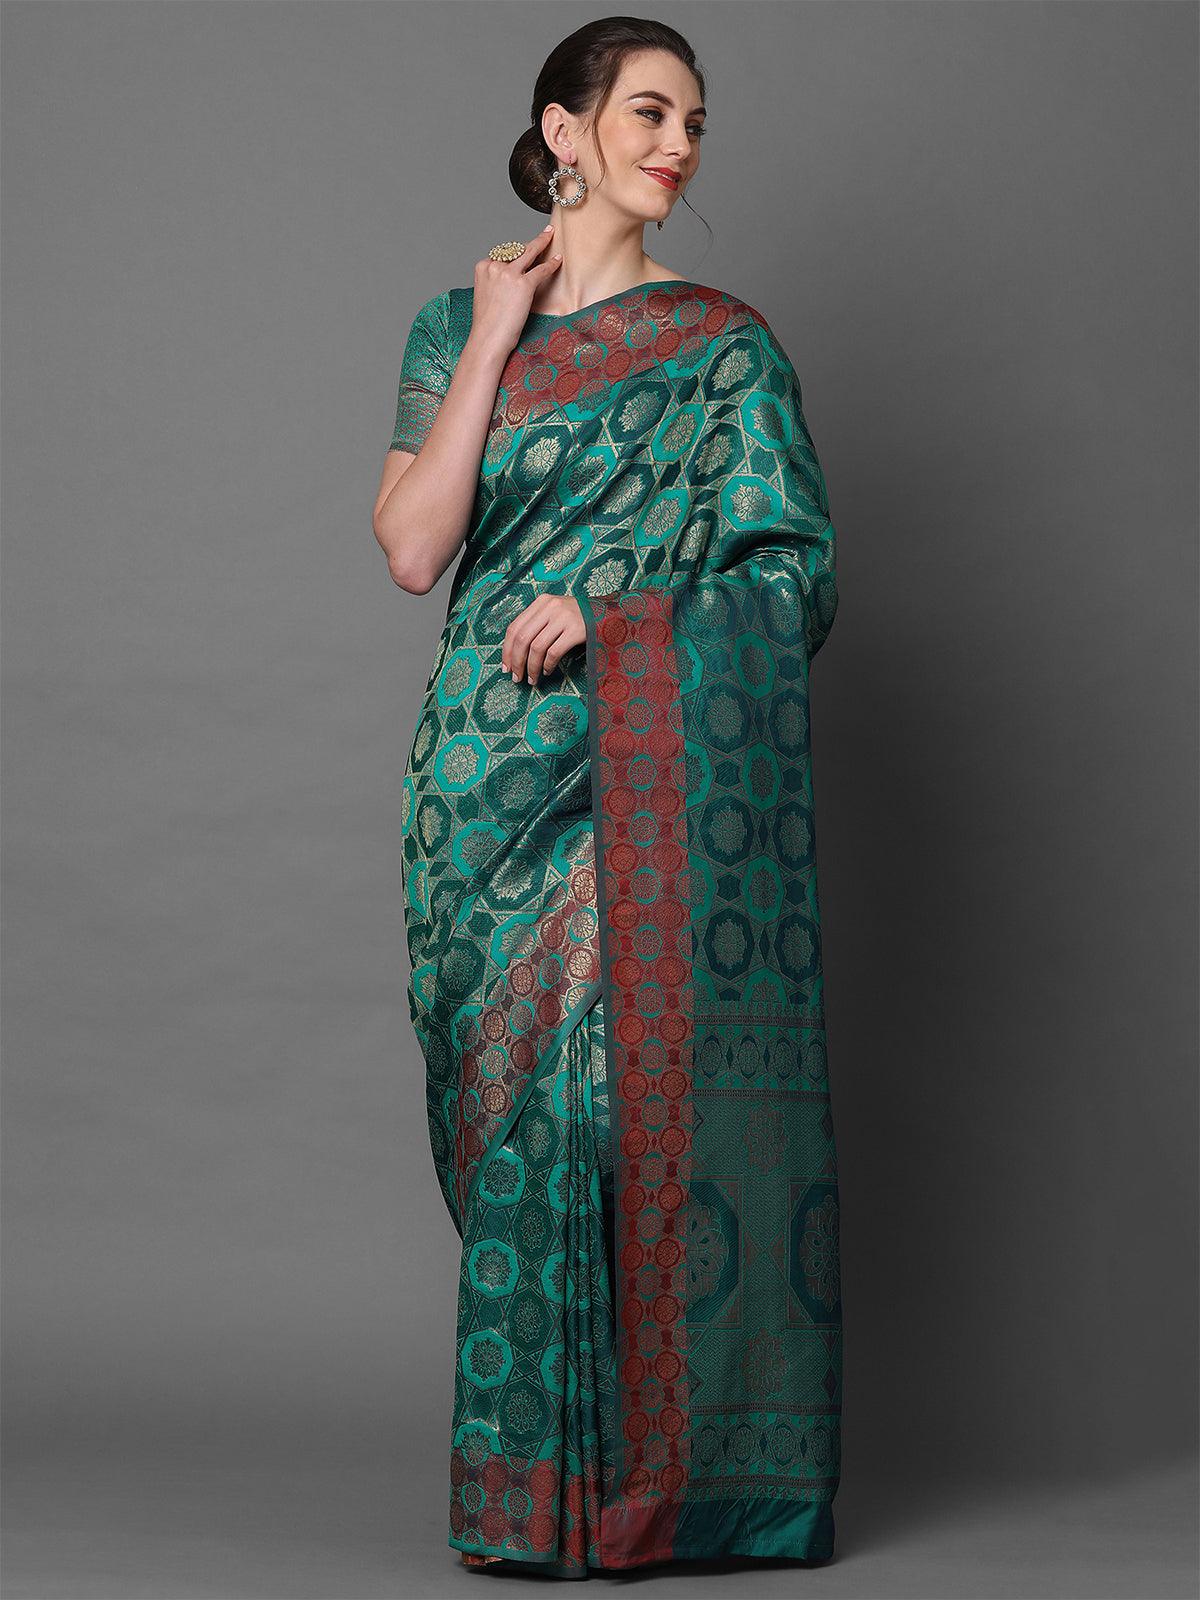 Teal Blue Party Wear Pure Satin Woven Design Saree With Unstitched Blouse - Odette